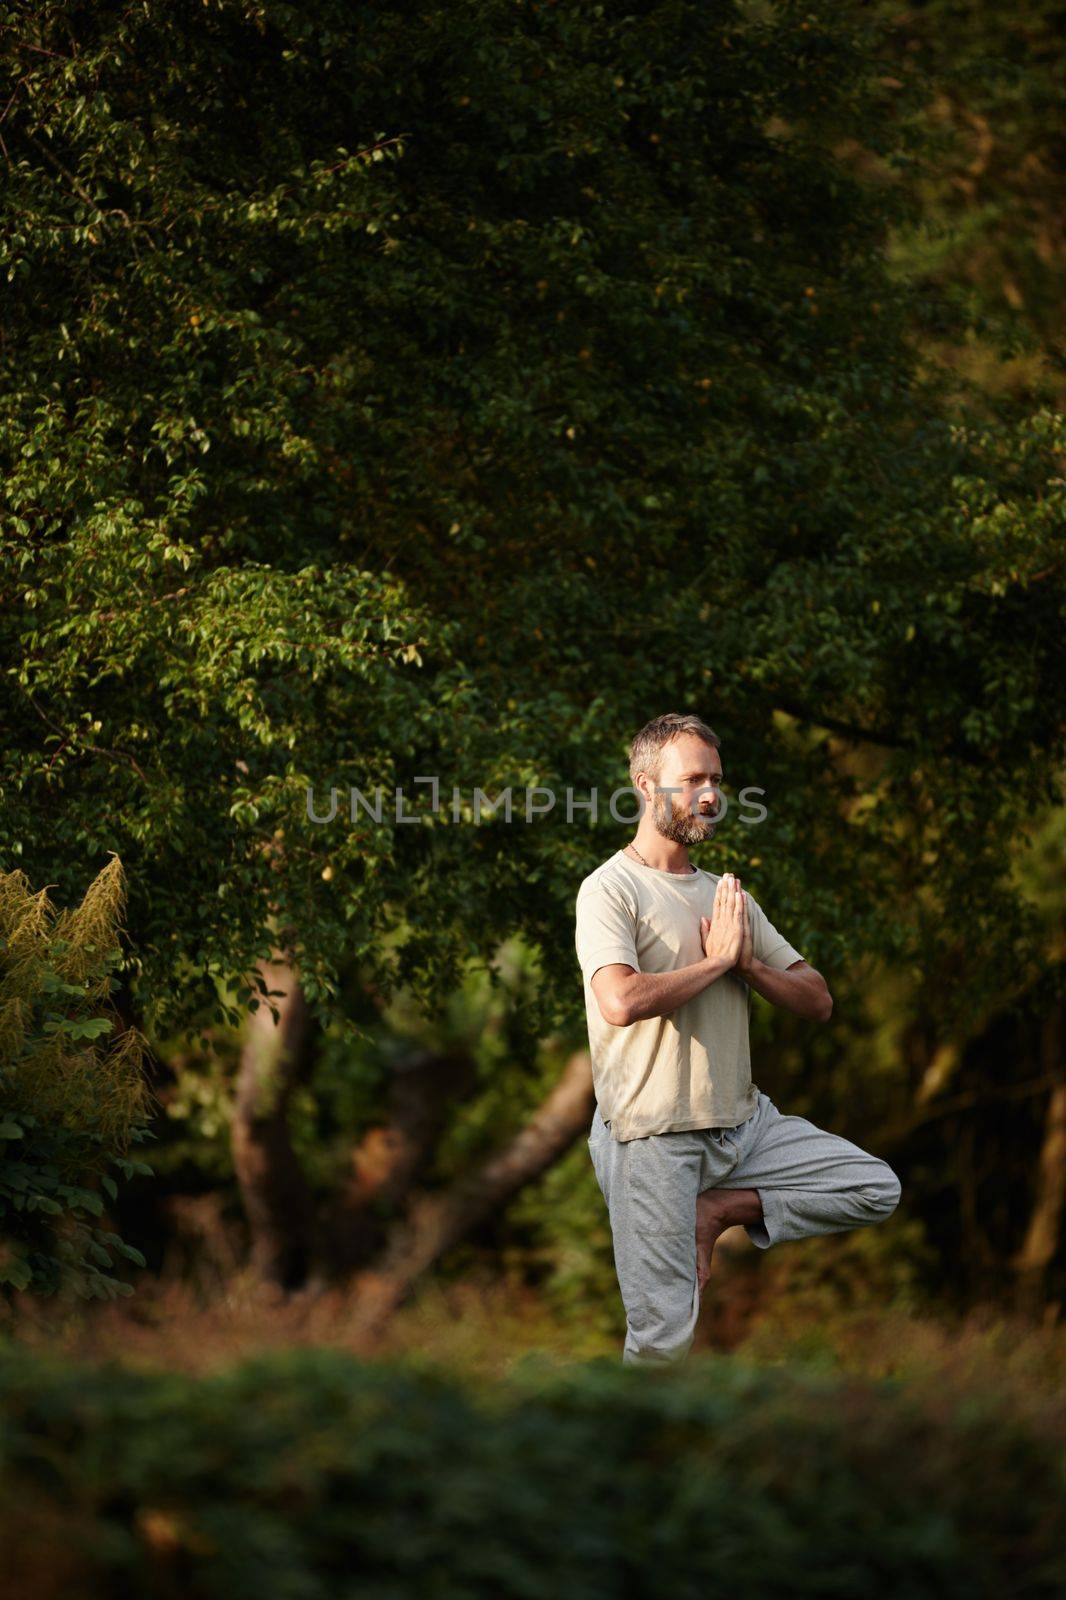 He found a tranquil yoga spot. a mature man doing a standing yoga pose in nature